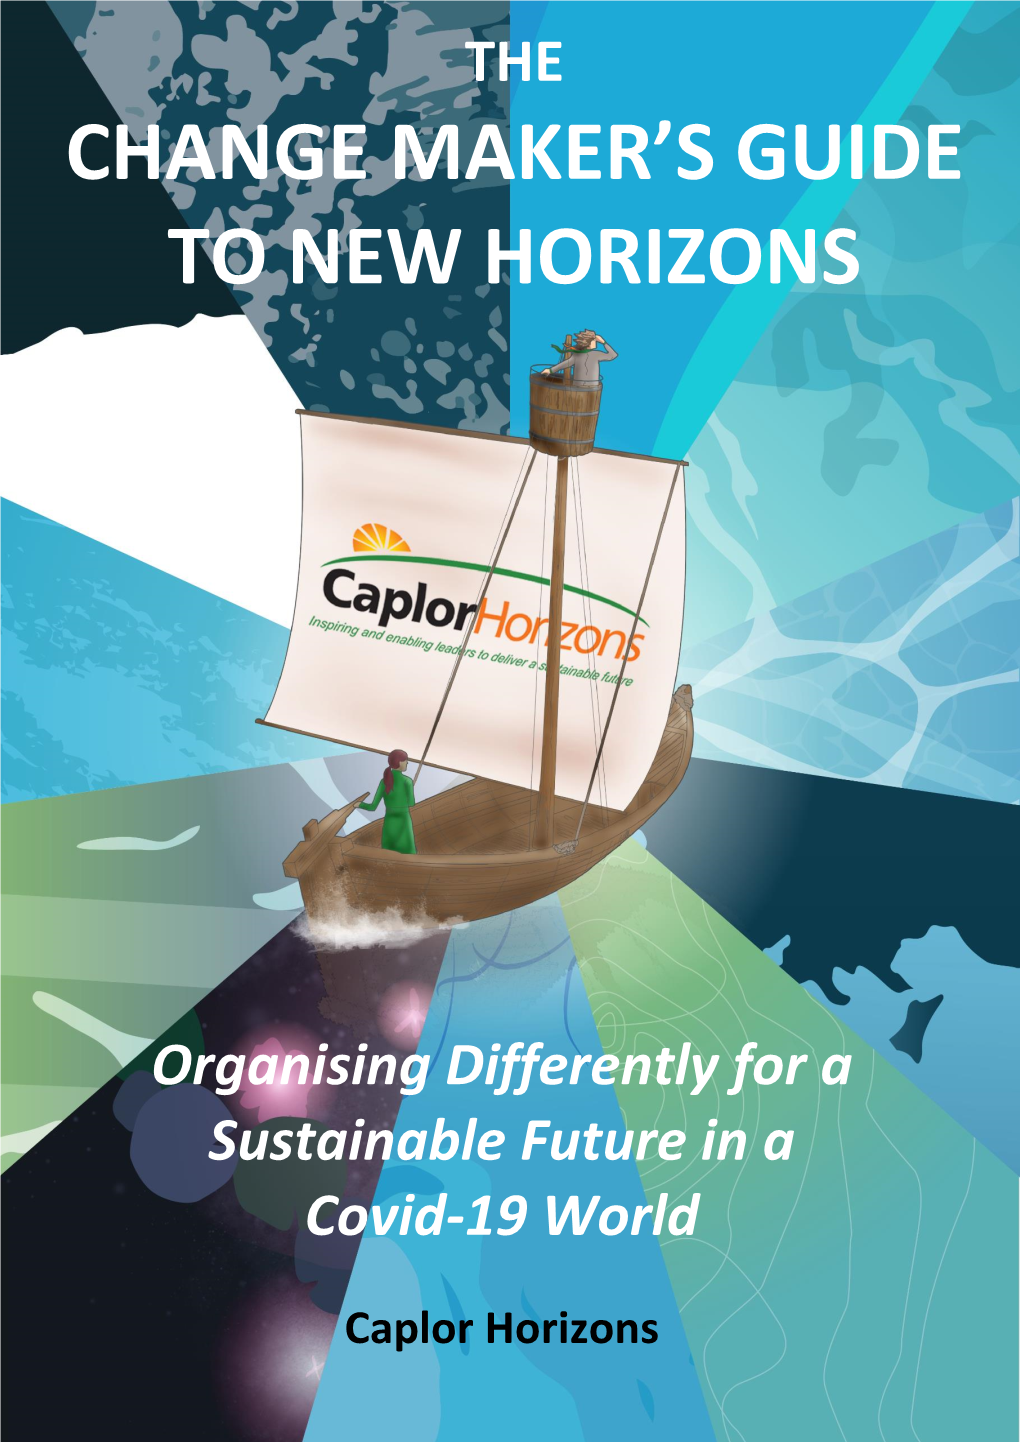 Change Maker's Guide to New Horizons